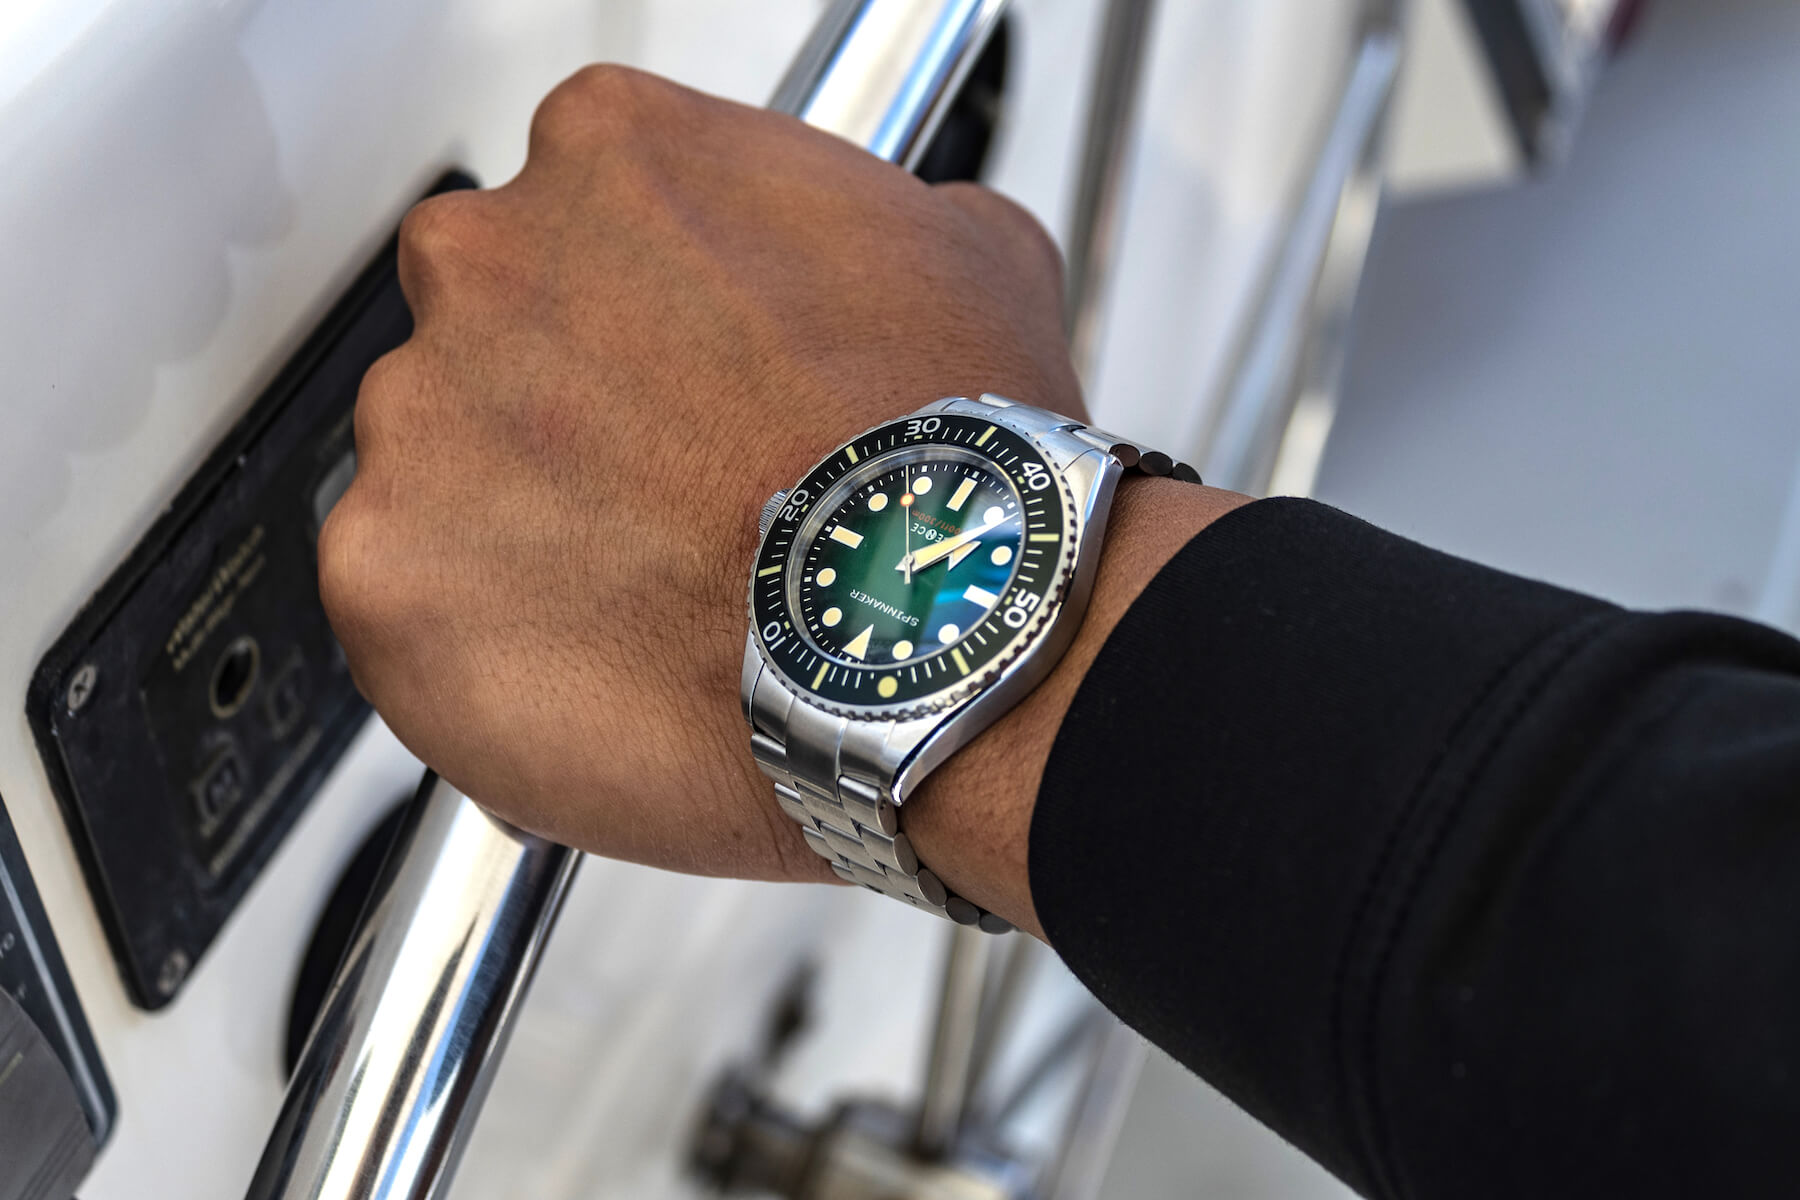 Spinnaker Introduces The Spence 300 Automatic Dive Watch - Wristwatch News